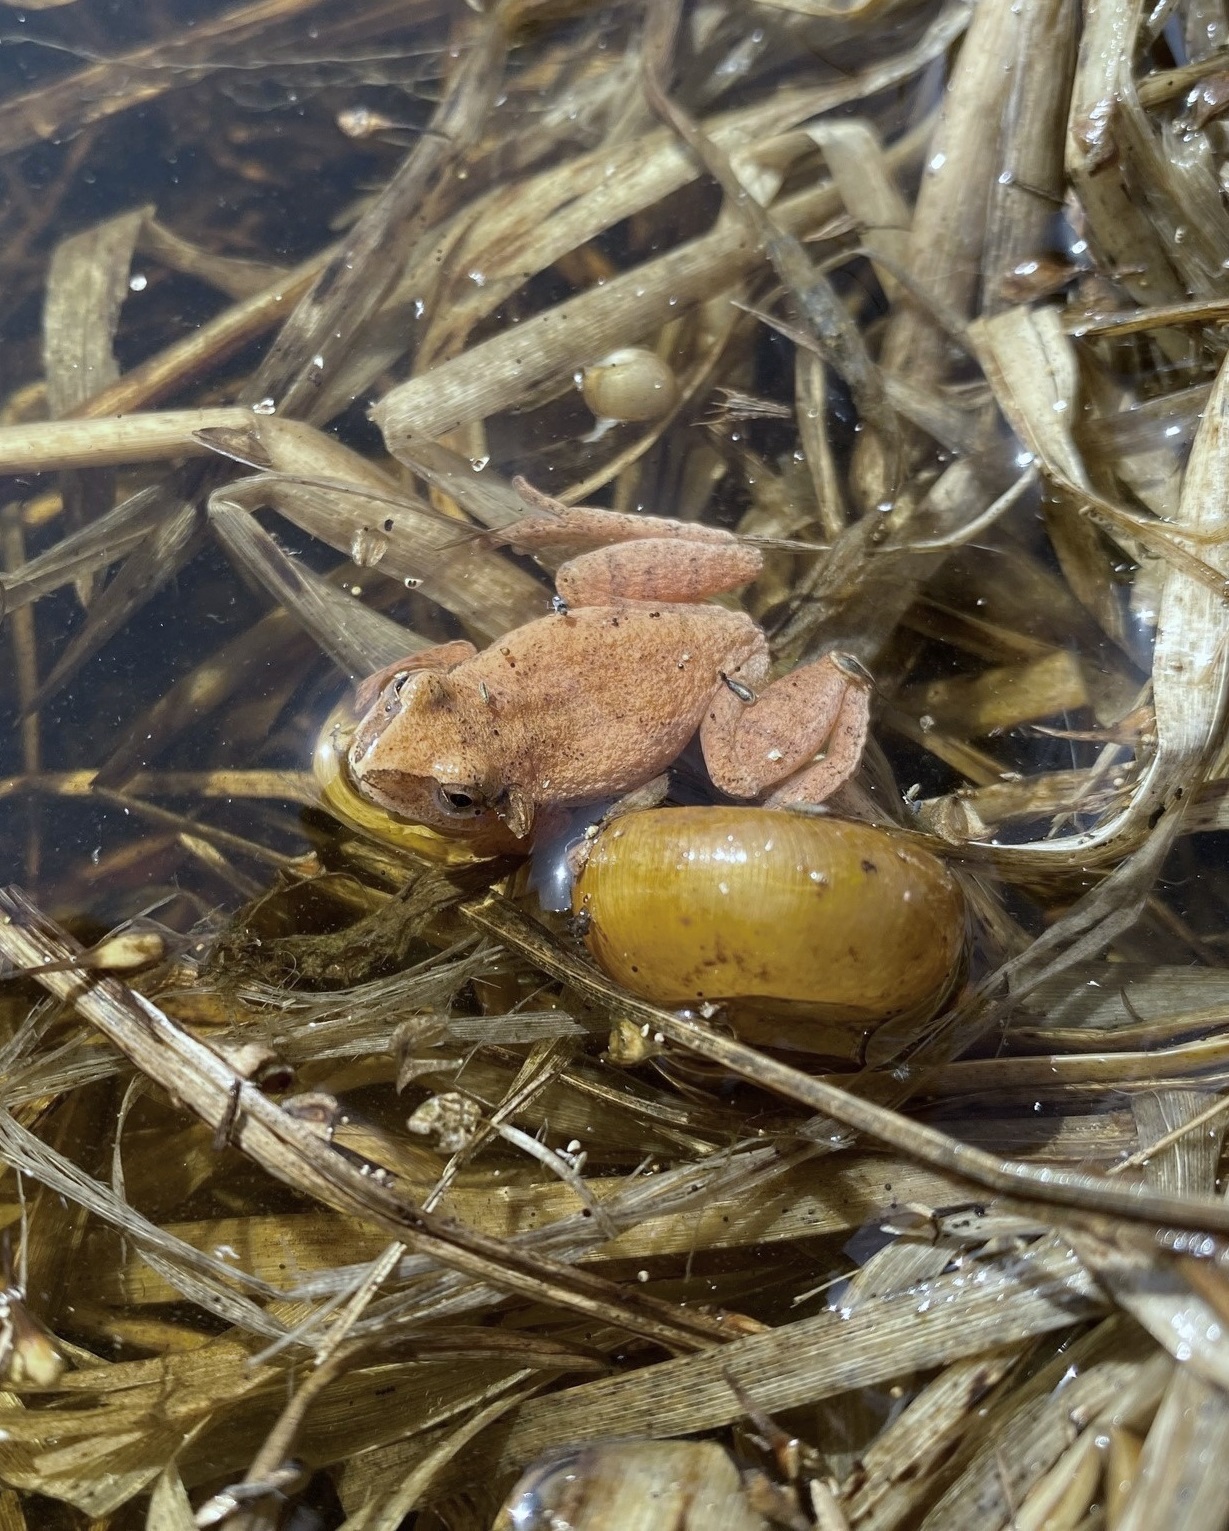 The spring peeper is small, brown, and sitting in shallow water. Directly next to it is a snail shell which is not much smaller than the frog.